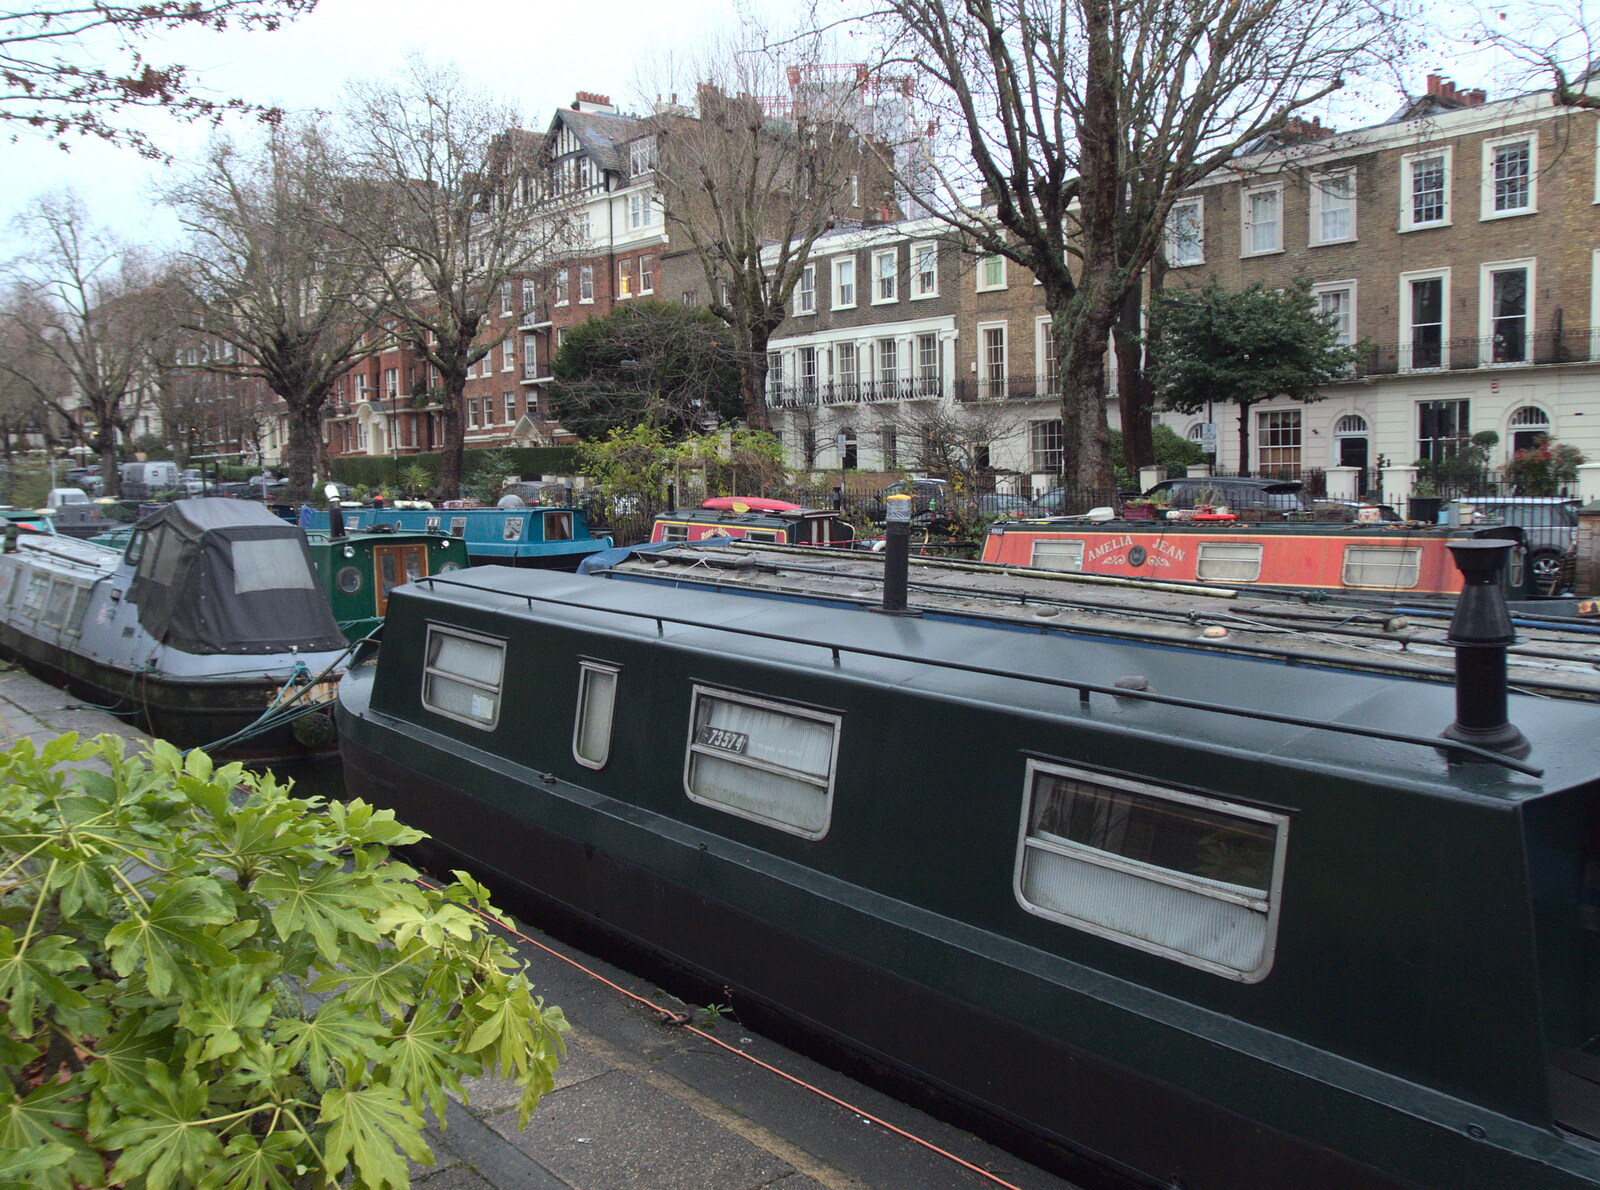 Houseboats along Blomfield Road from Little Venice and the BSCC Christmas Dinner, London and Norfolk - 1st December 2018